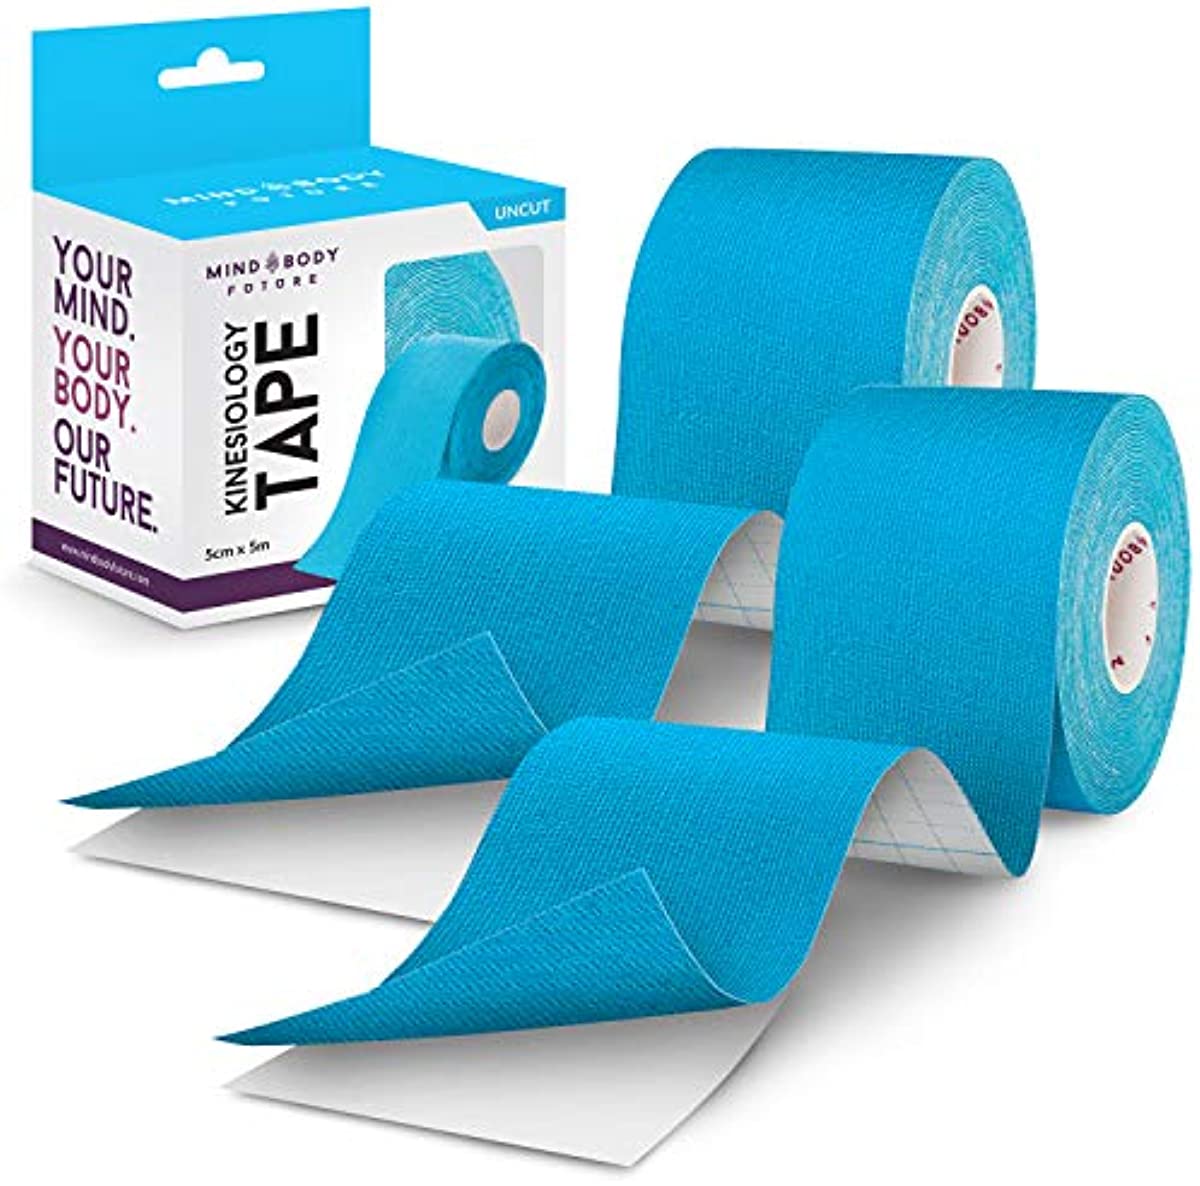 Kinesiology Tape - Light Blue (1 Pack) - Medical Grade Uncut 5cm x 5m Roll - Ideal for Athletic Sports Physio Strapping and Muscle Injury & Support - Includes eGuide